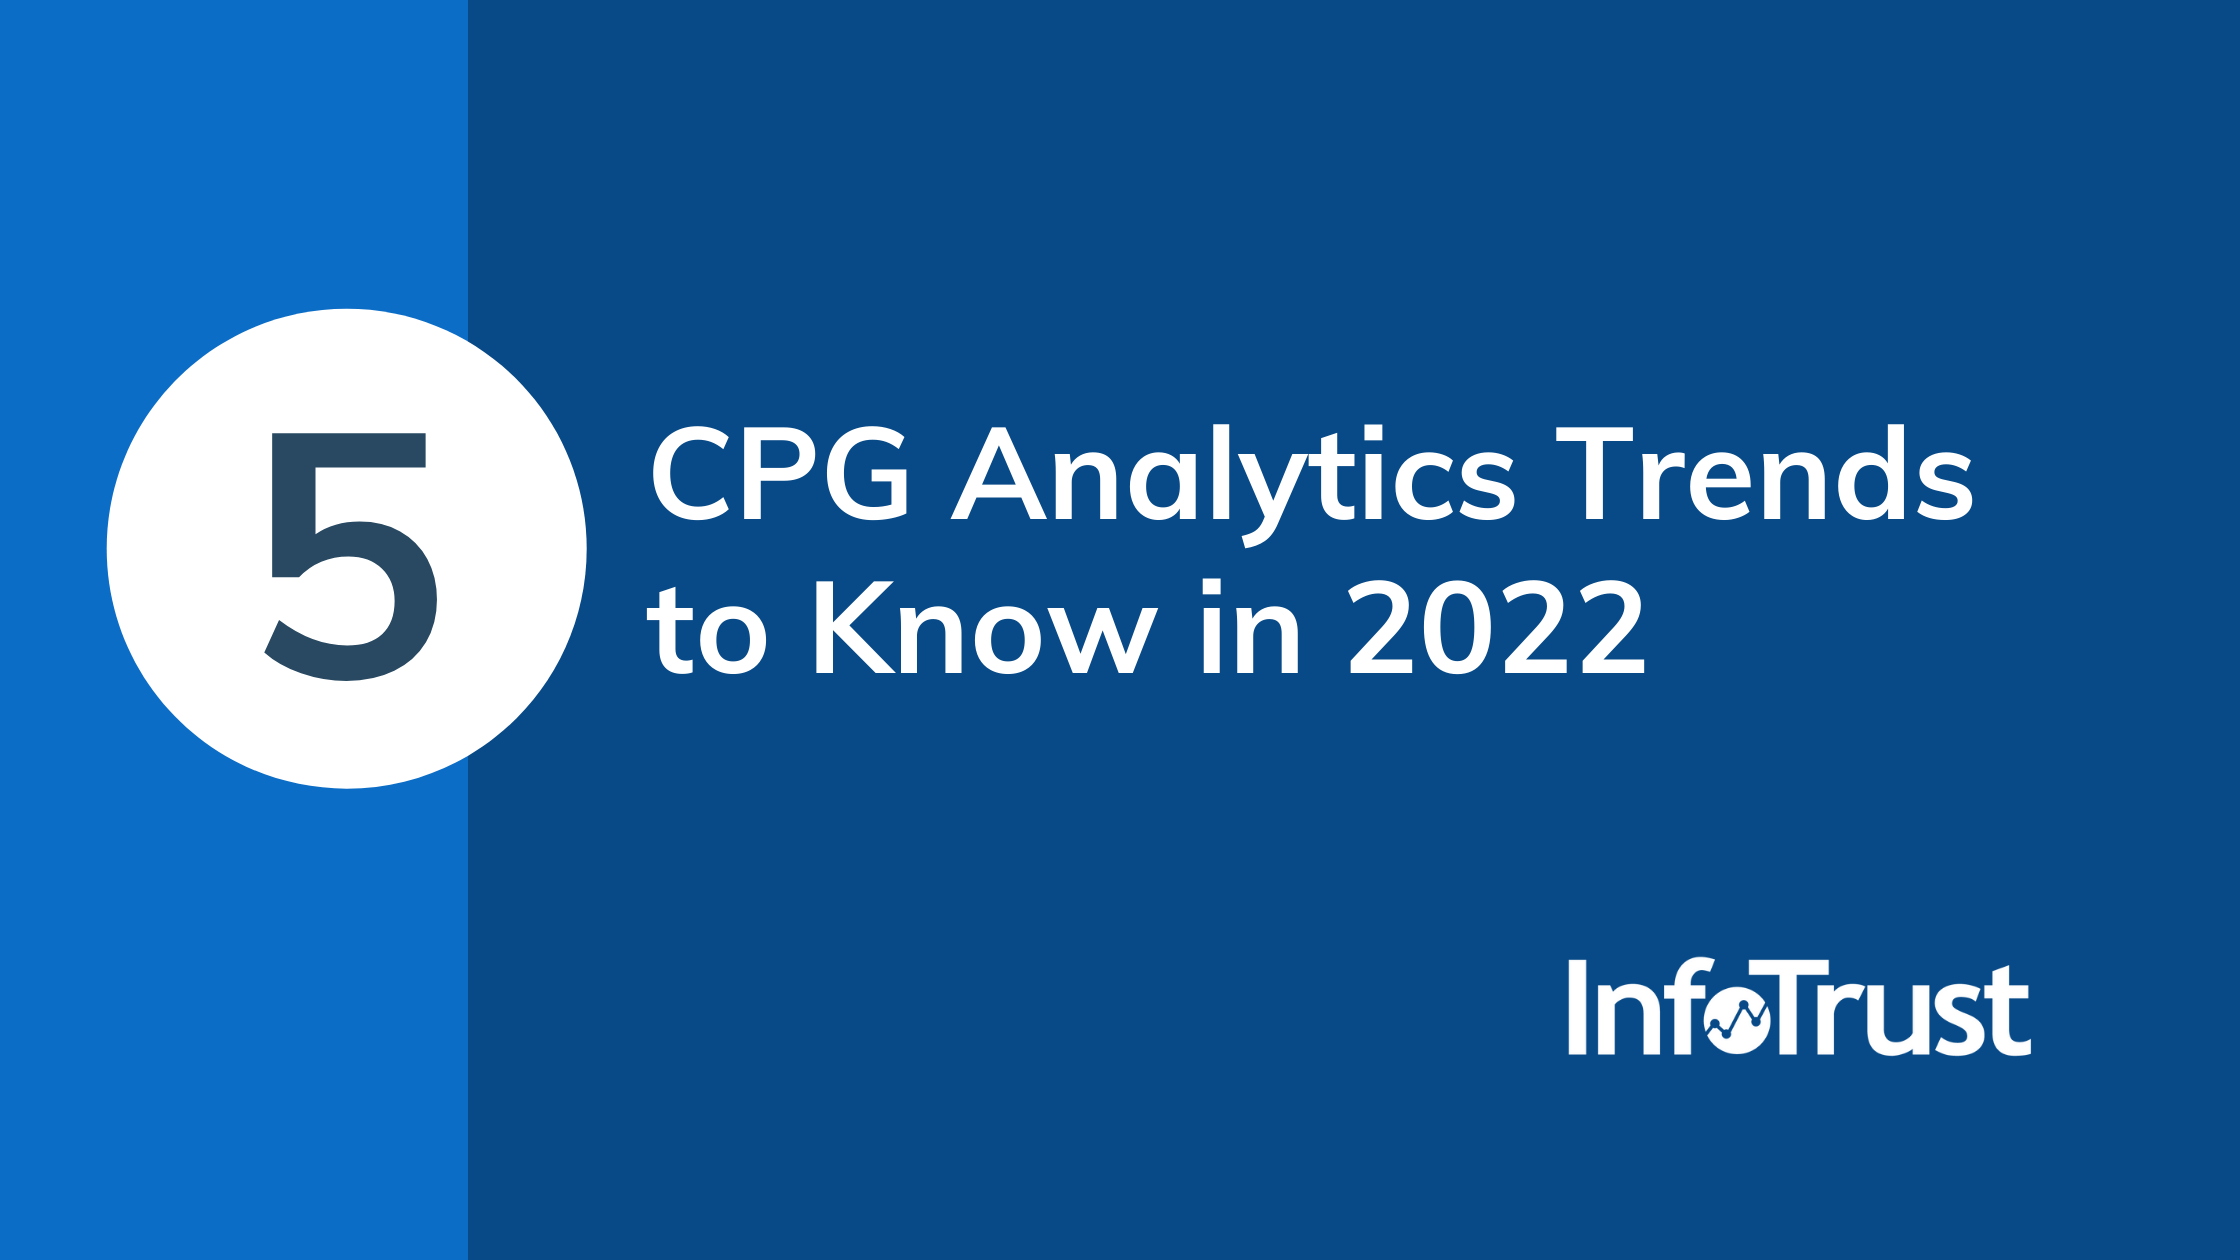 Top 5 CPG Analytics Trends to Know in 2022